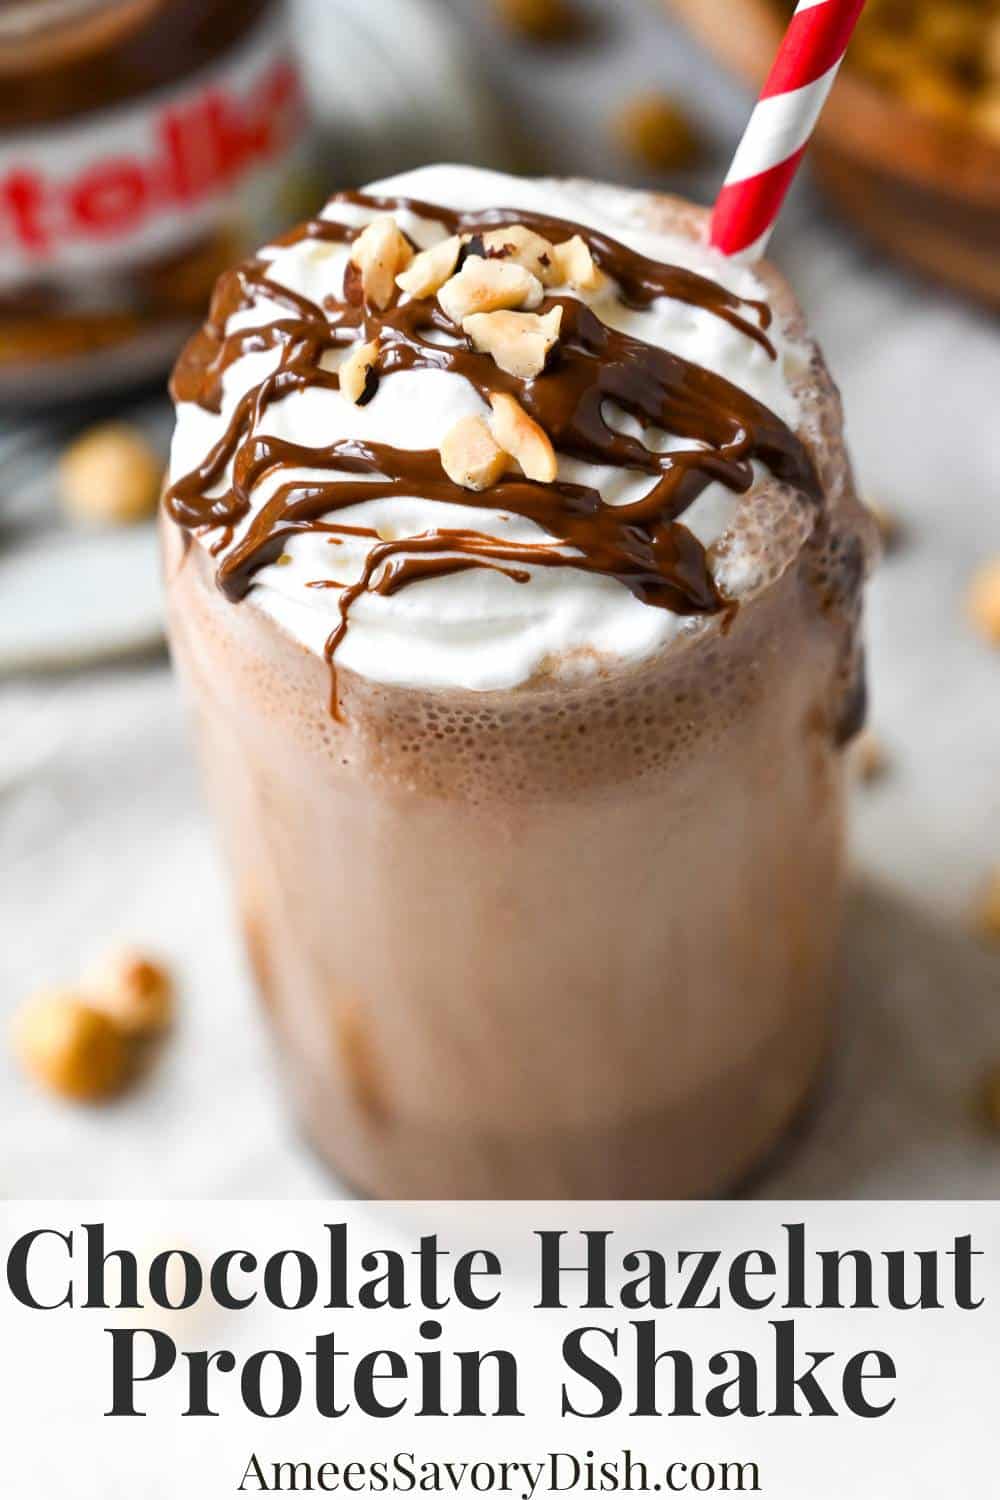 Craving Nutella?! Try this nutrient-dense hazelnut protein shake recipe with whey protein, cocoa, and lightly toasted hazelnuts. via @Ameessavorydish